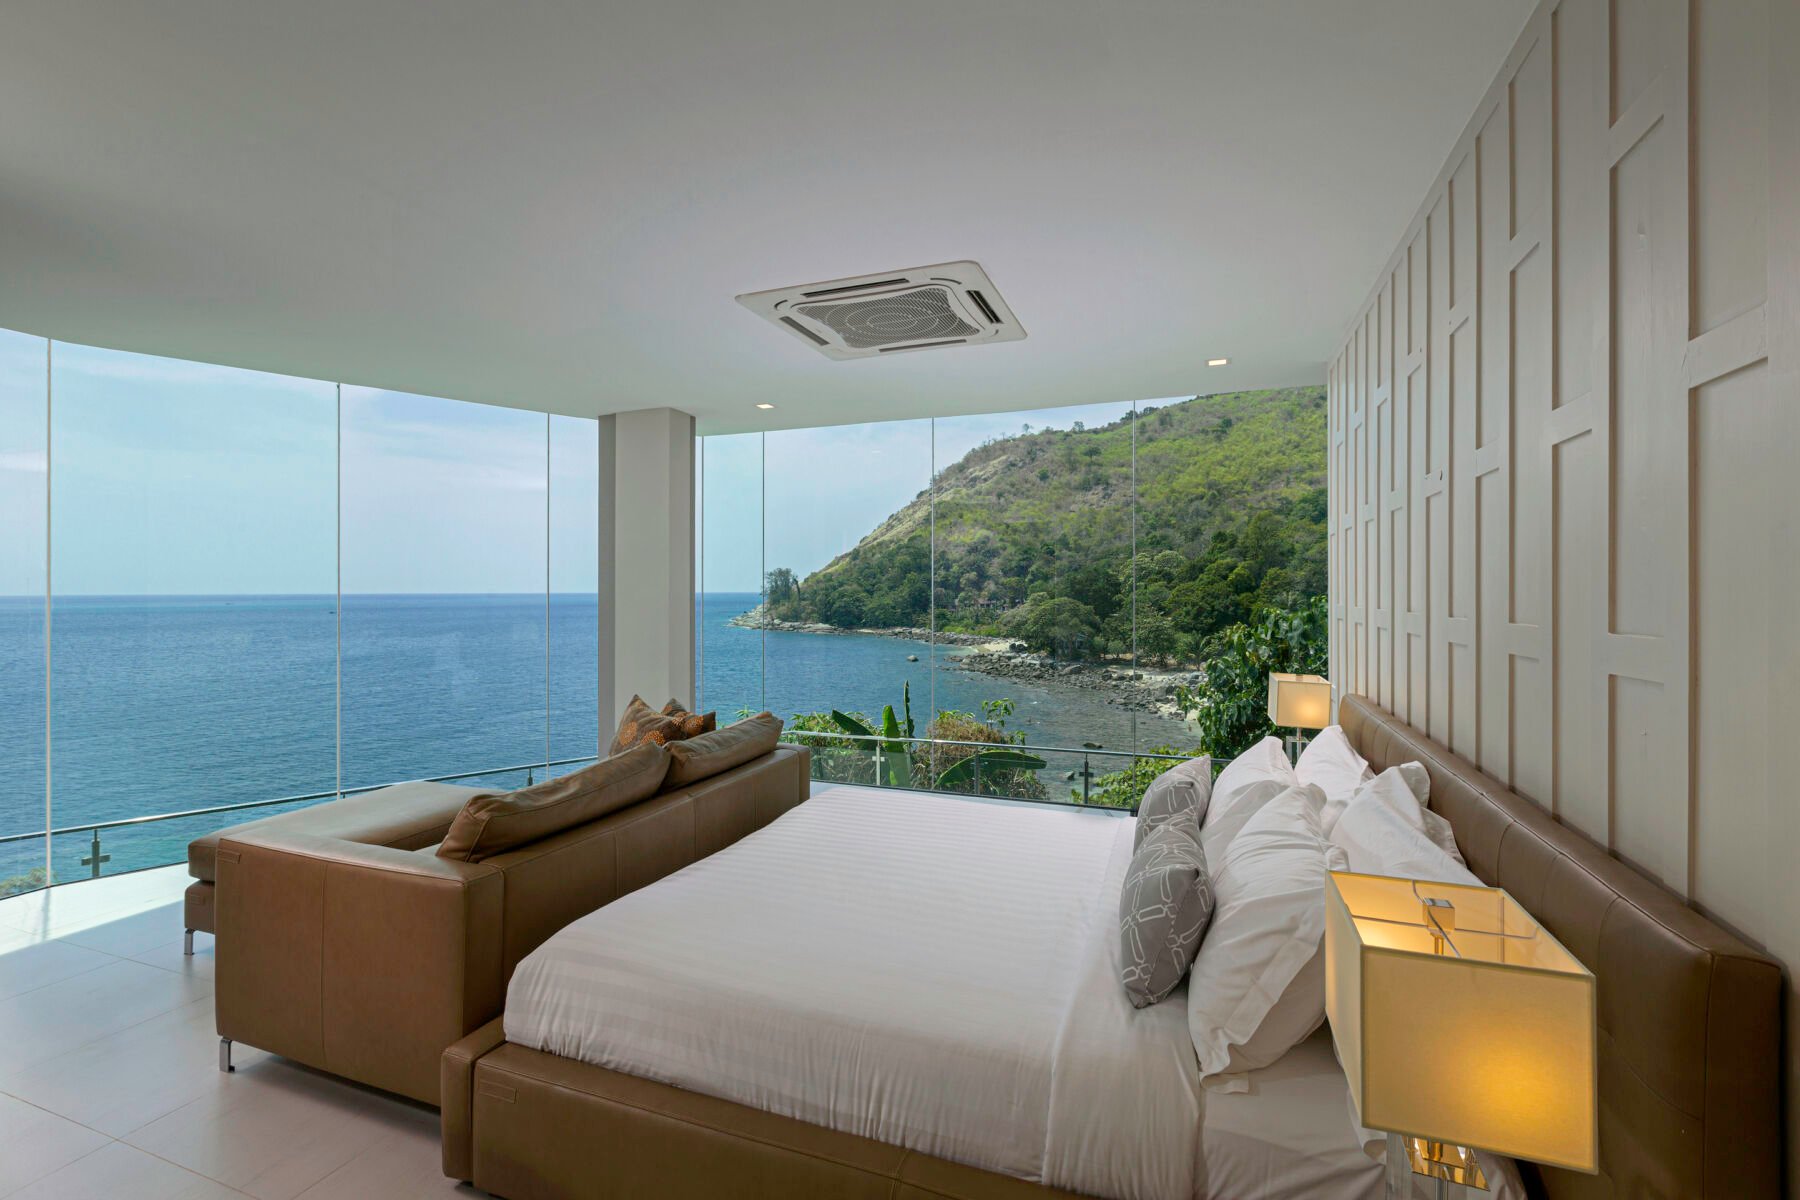 A big bedroom with glass walls overlooking the ocean - a luxury villa in Phuket, Thailand